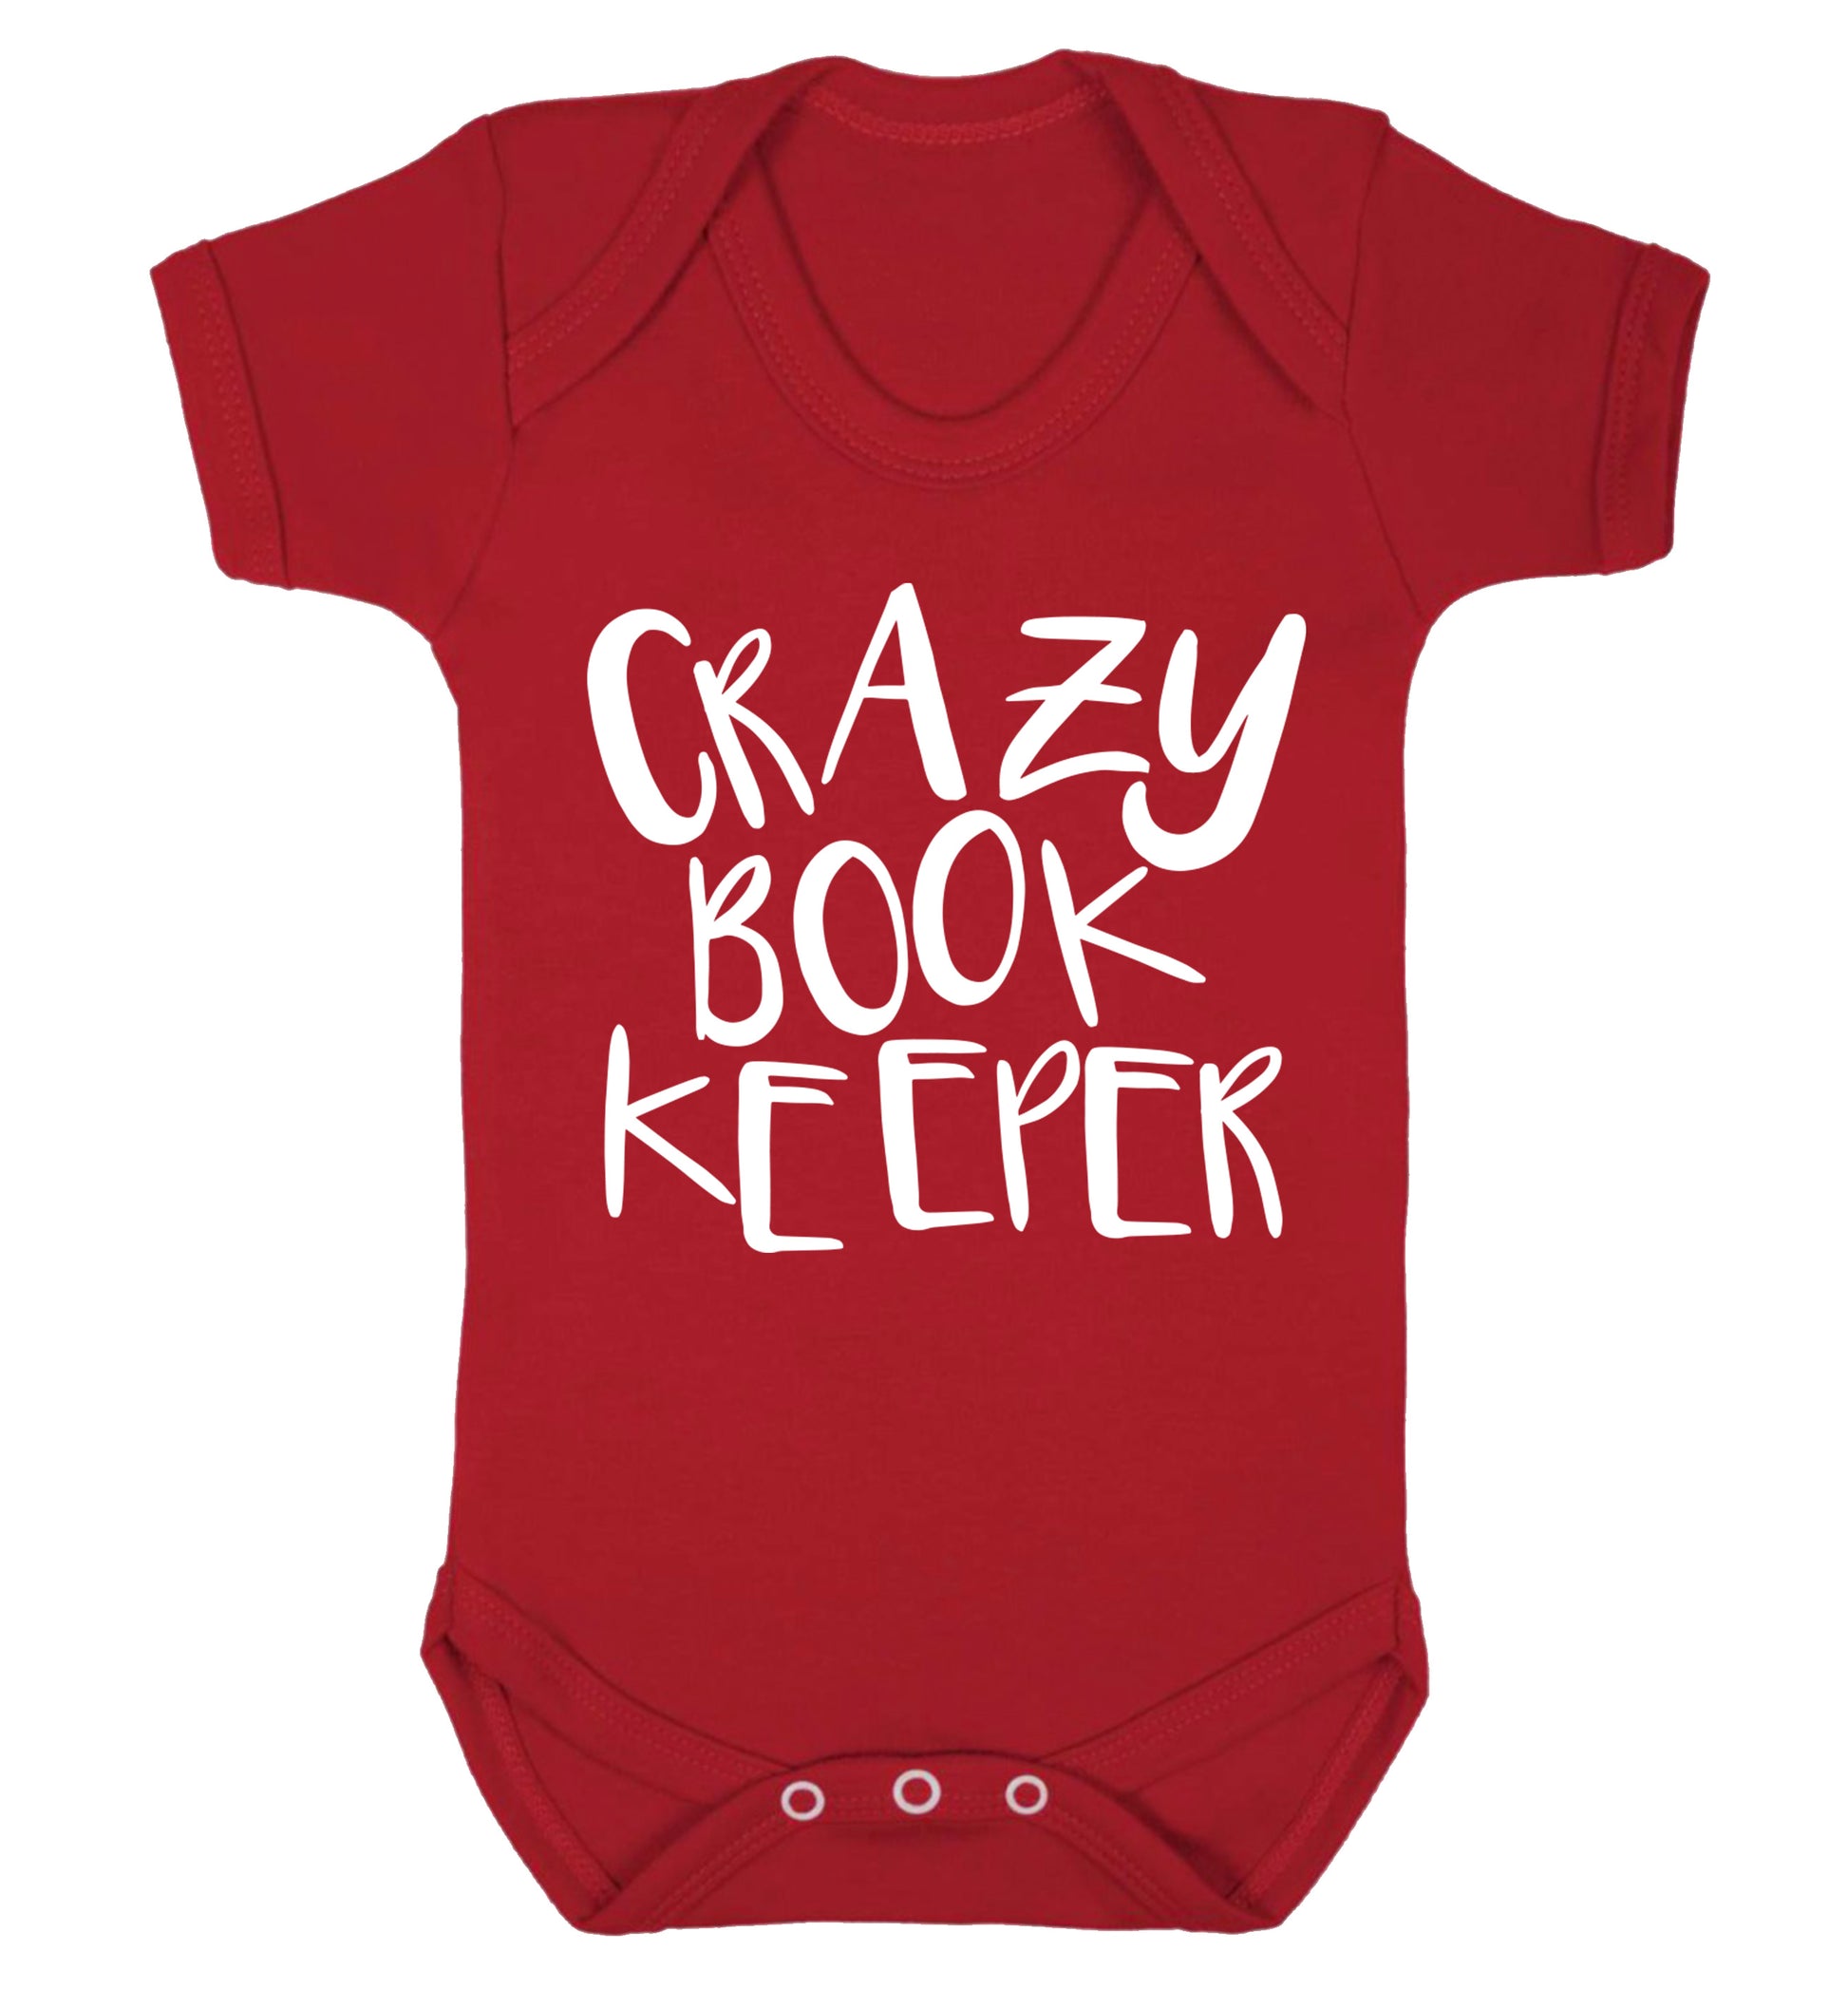 Crazy bookkeeper Baby Vest red 18-24 months